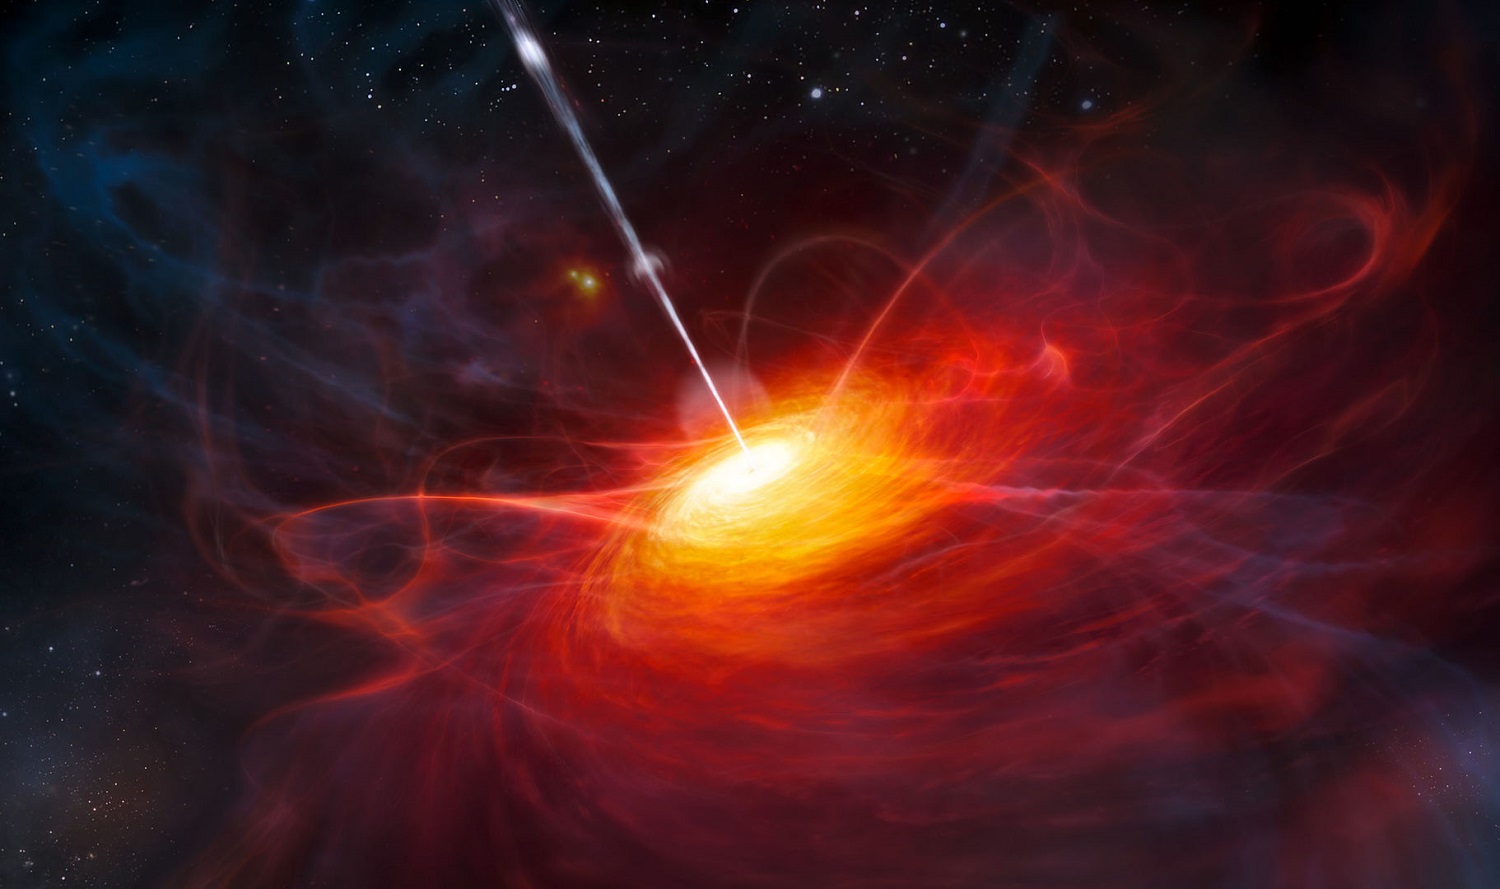 Three quasars make up one of the most massive objects known.  When did they originate?